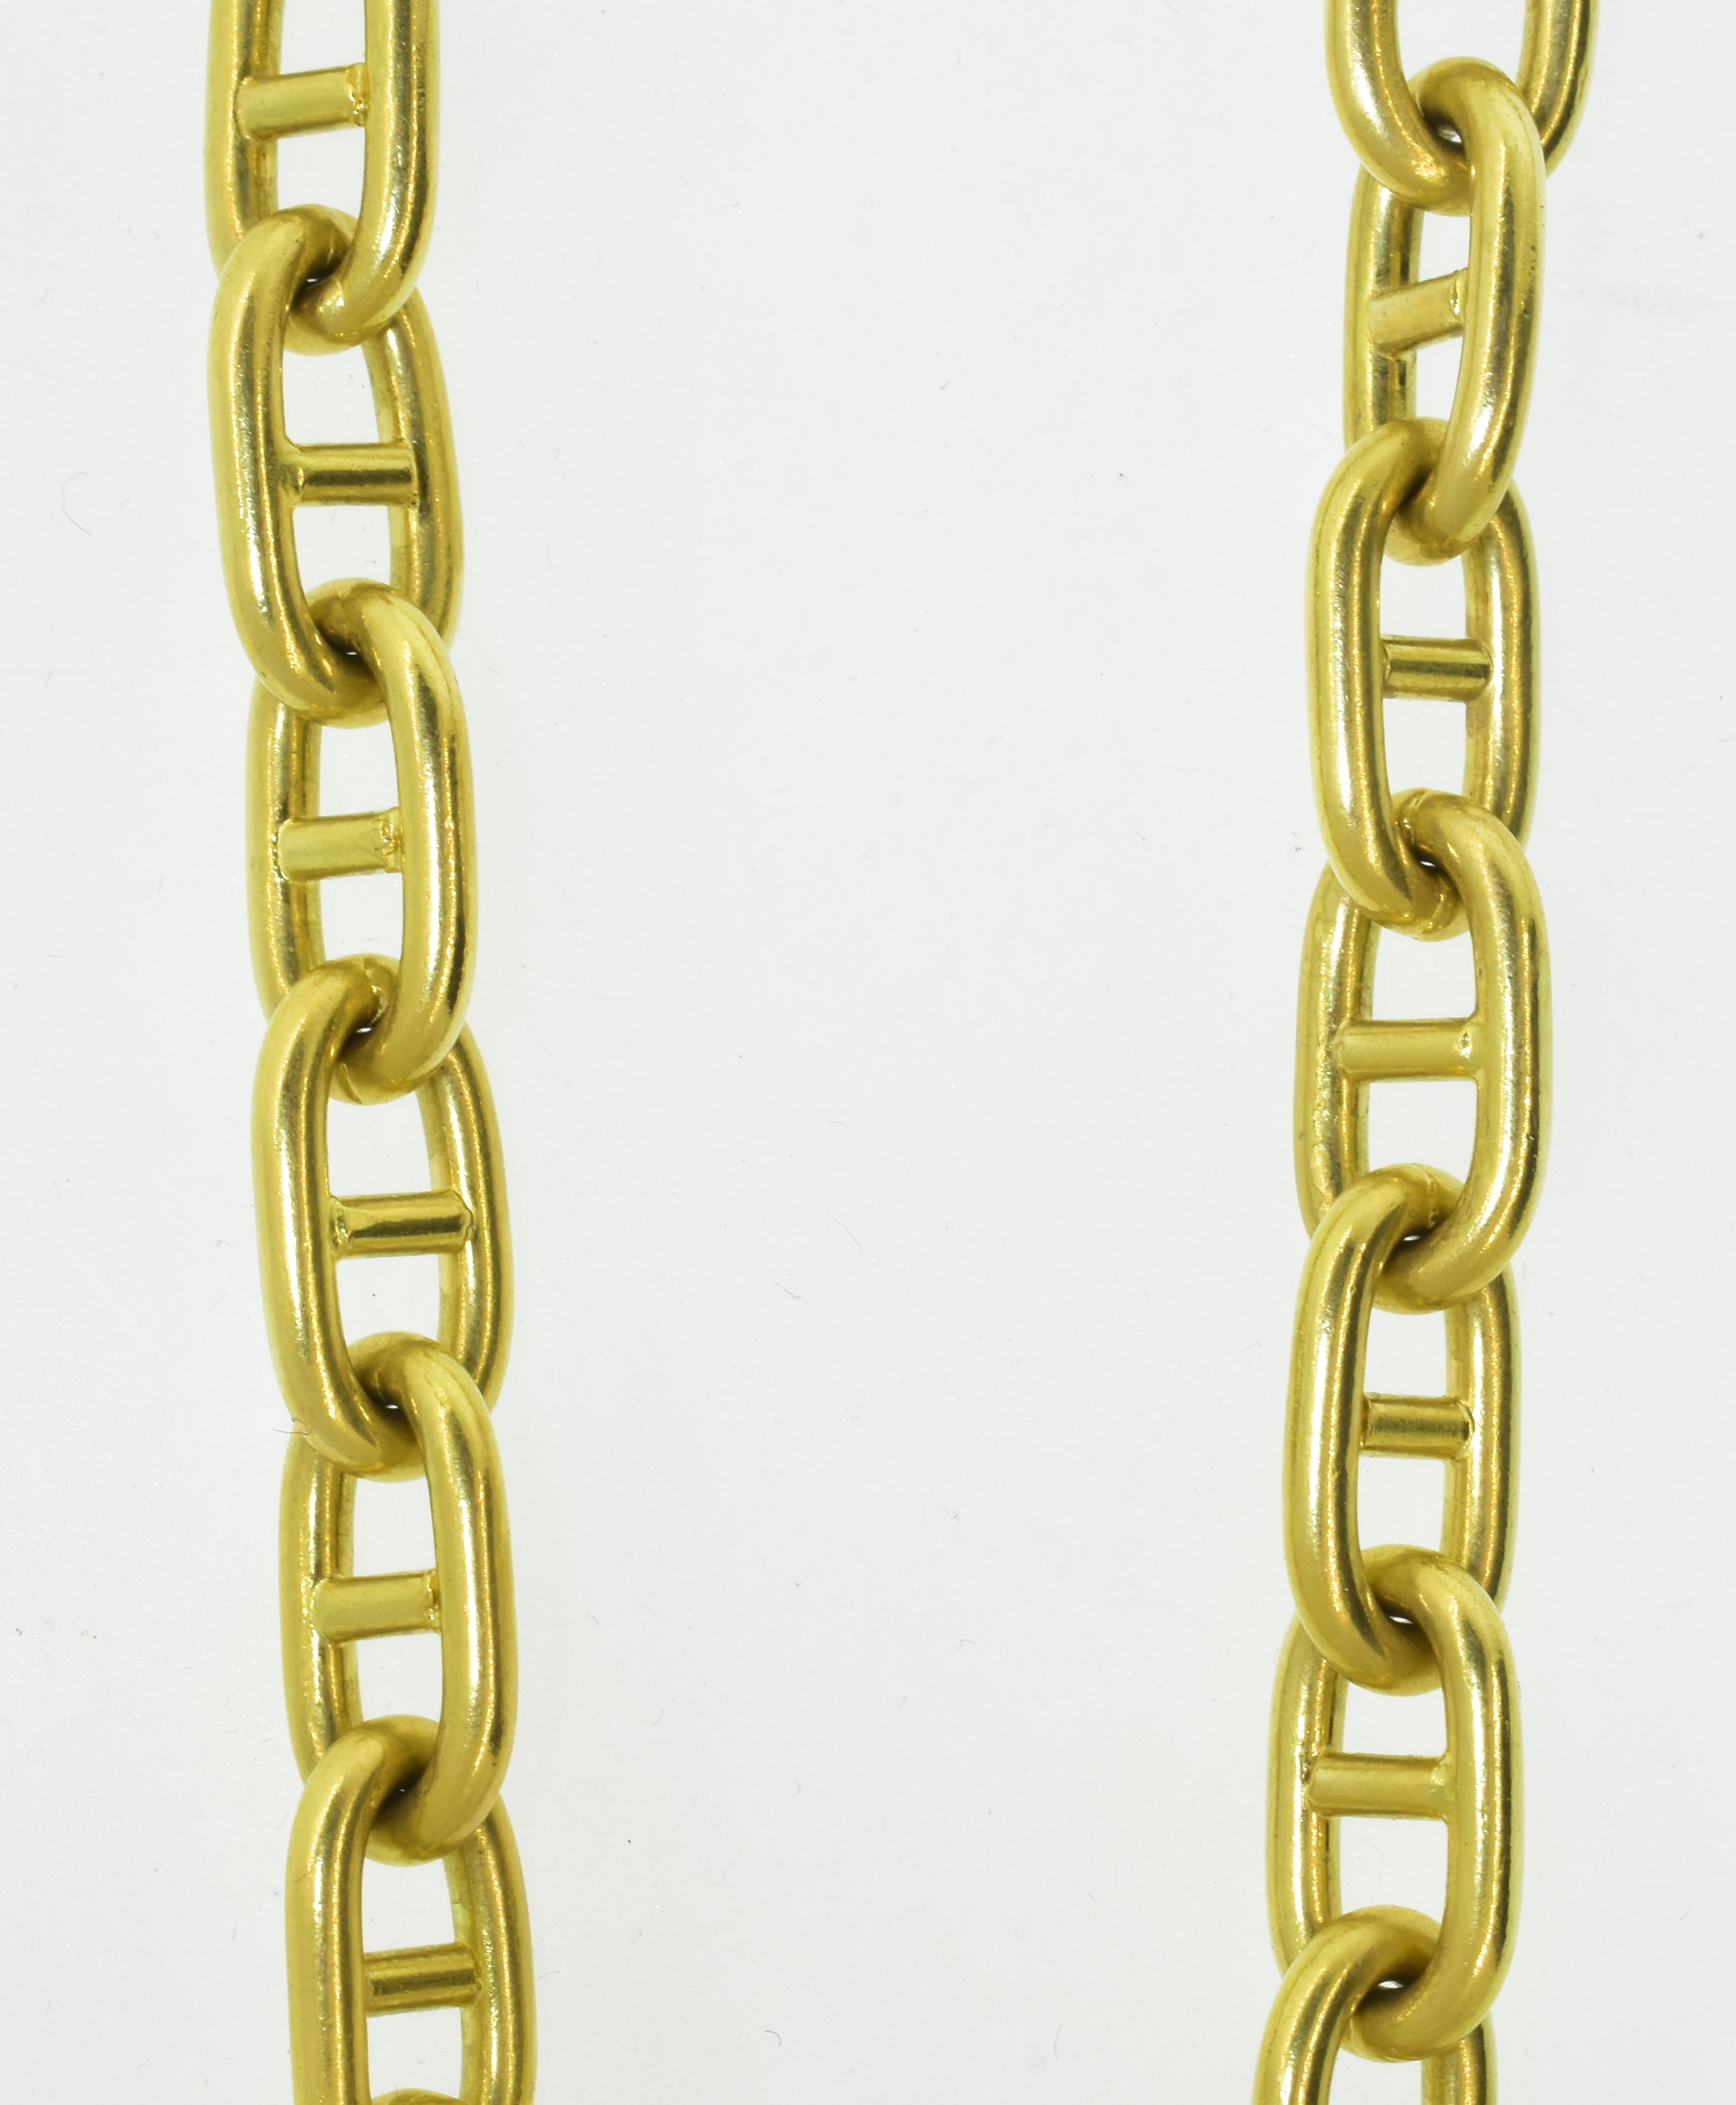 Bulgari 18K long vintage chain.  This 36 inch chain is most unusual of this type because it is solid gold and not a light-weight version.  The chain is unusually heavy - weighing 171.2 grams  -that is 5 1/2 troy ounces. (the gold cash value alone is